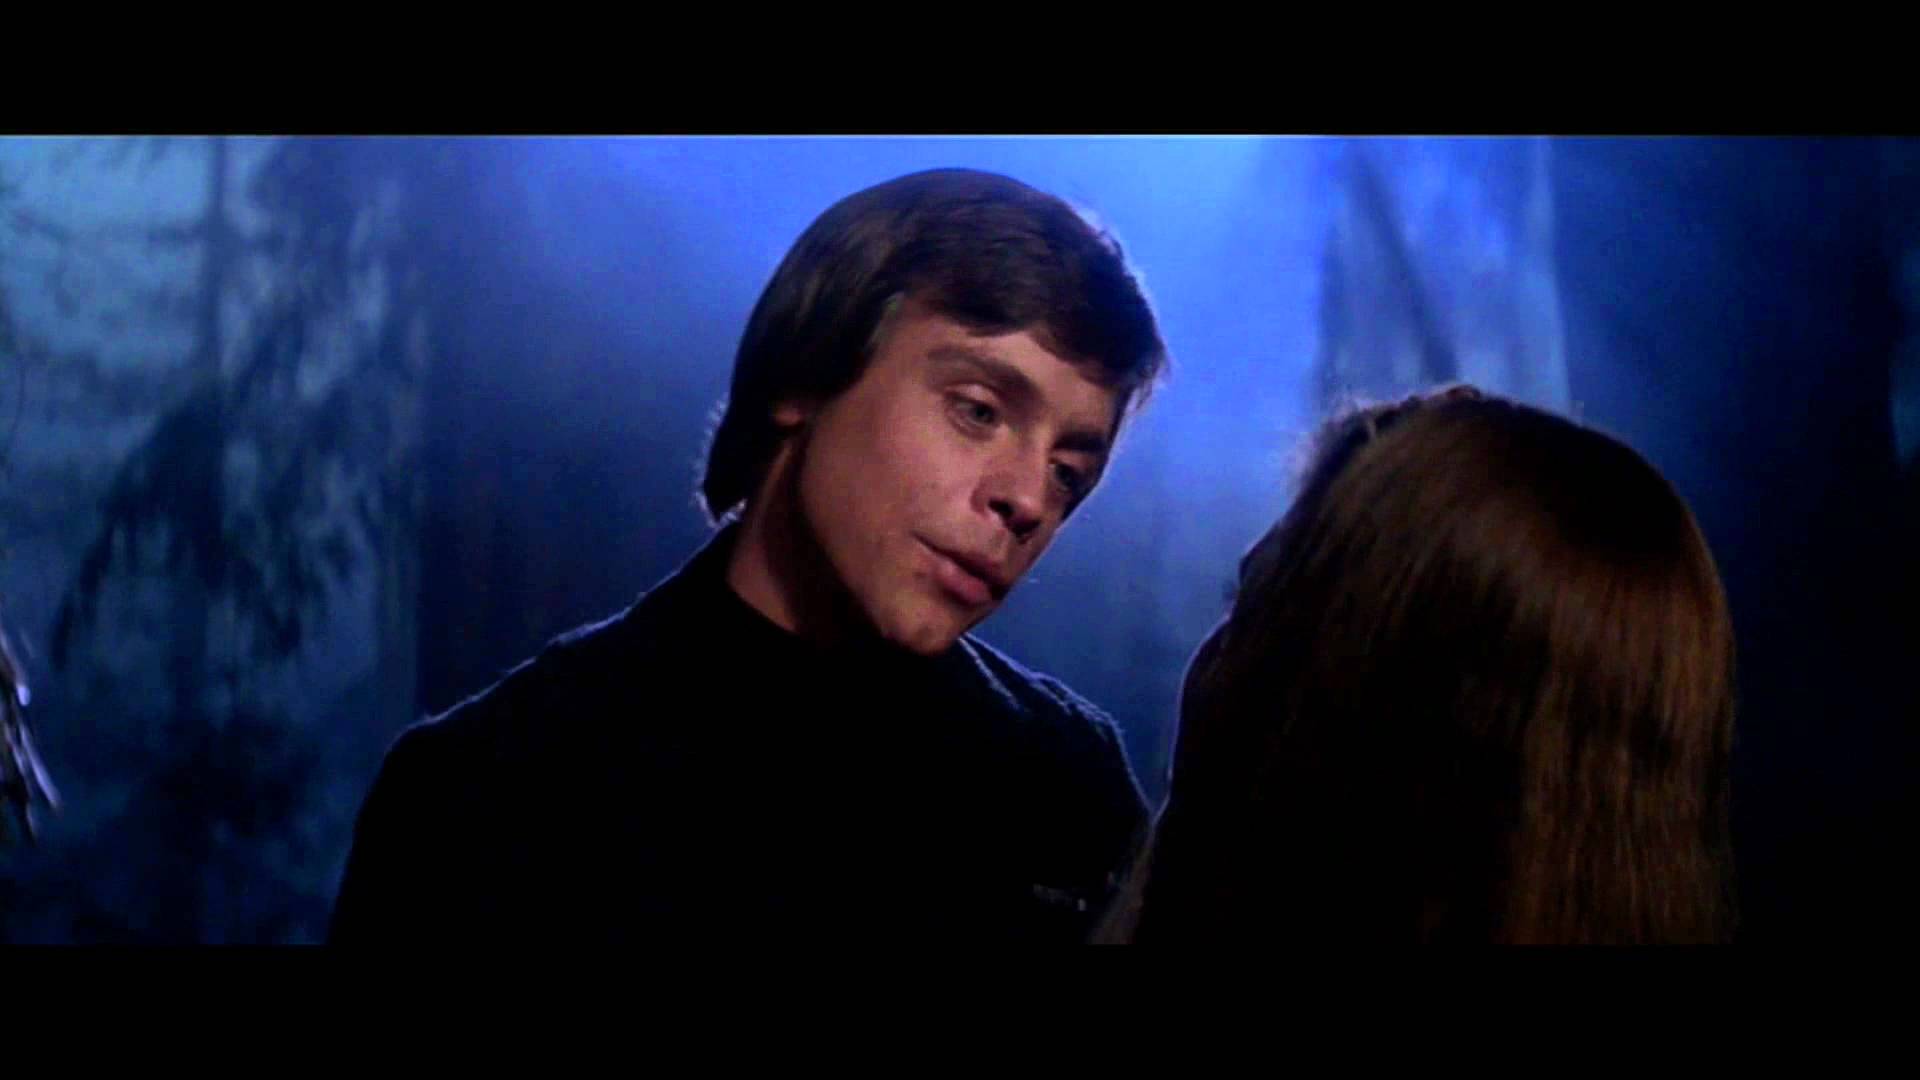 Star Wars VI: Return of the Jedi - "The Force is strong in my family" (Force Theme, Luke and Leia) 1